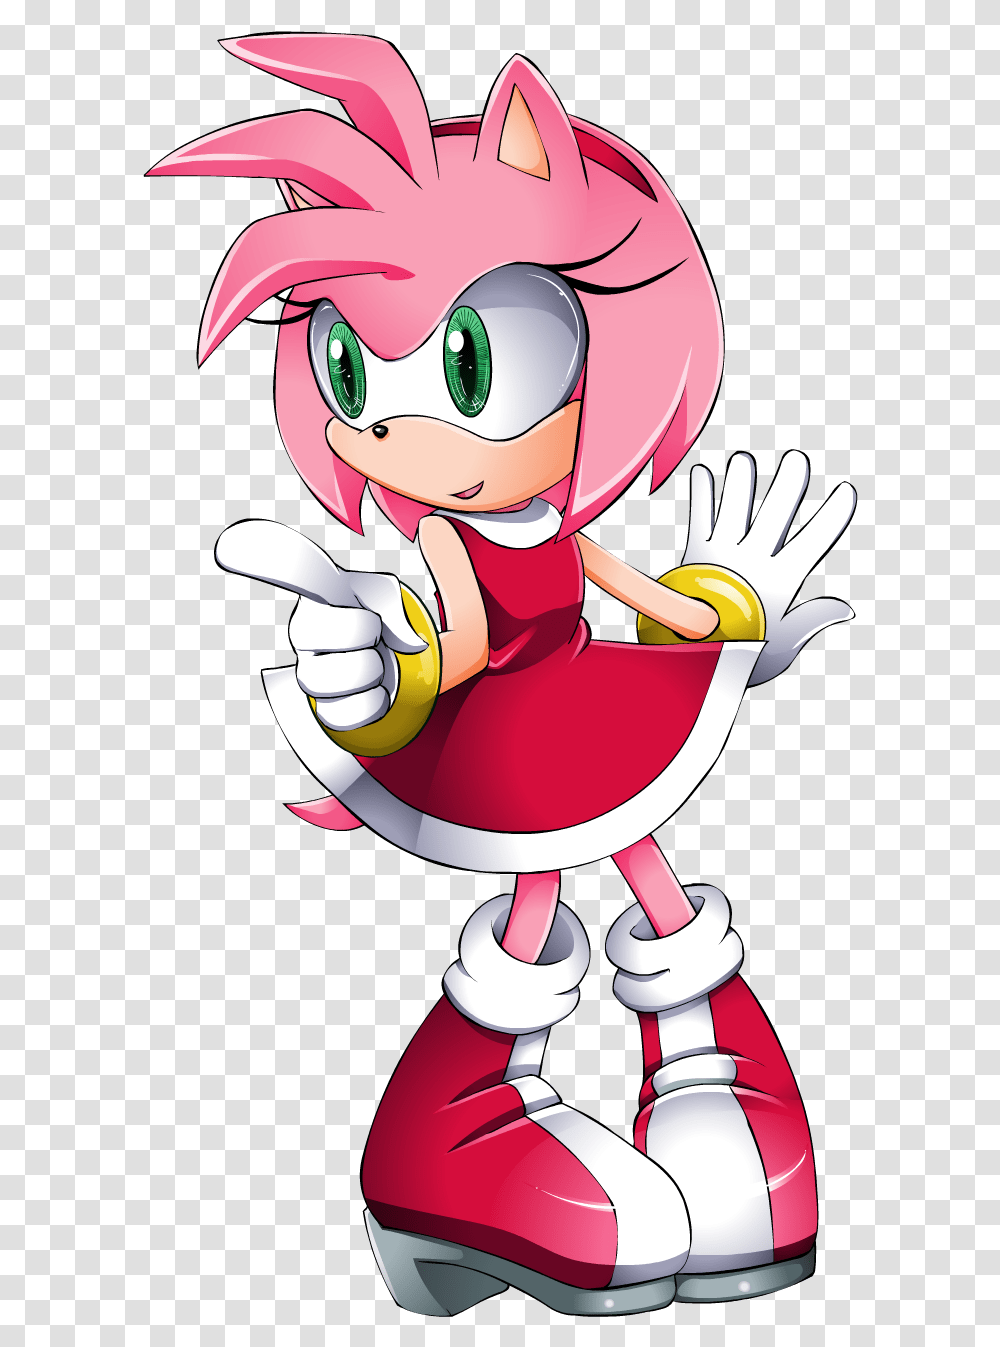 Download Free Amy Rose Amy Rose, Toy, Performer, Graphics, Art Transparent Png